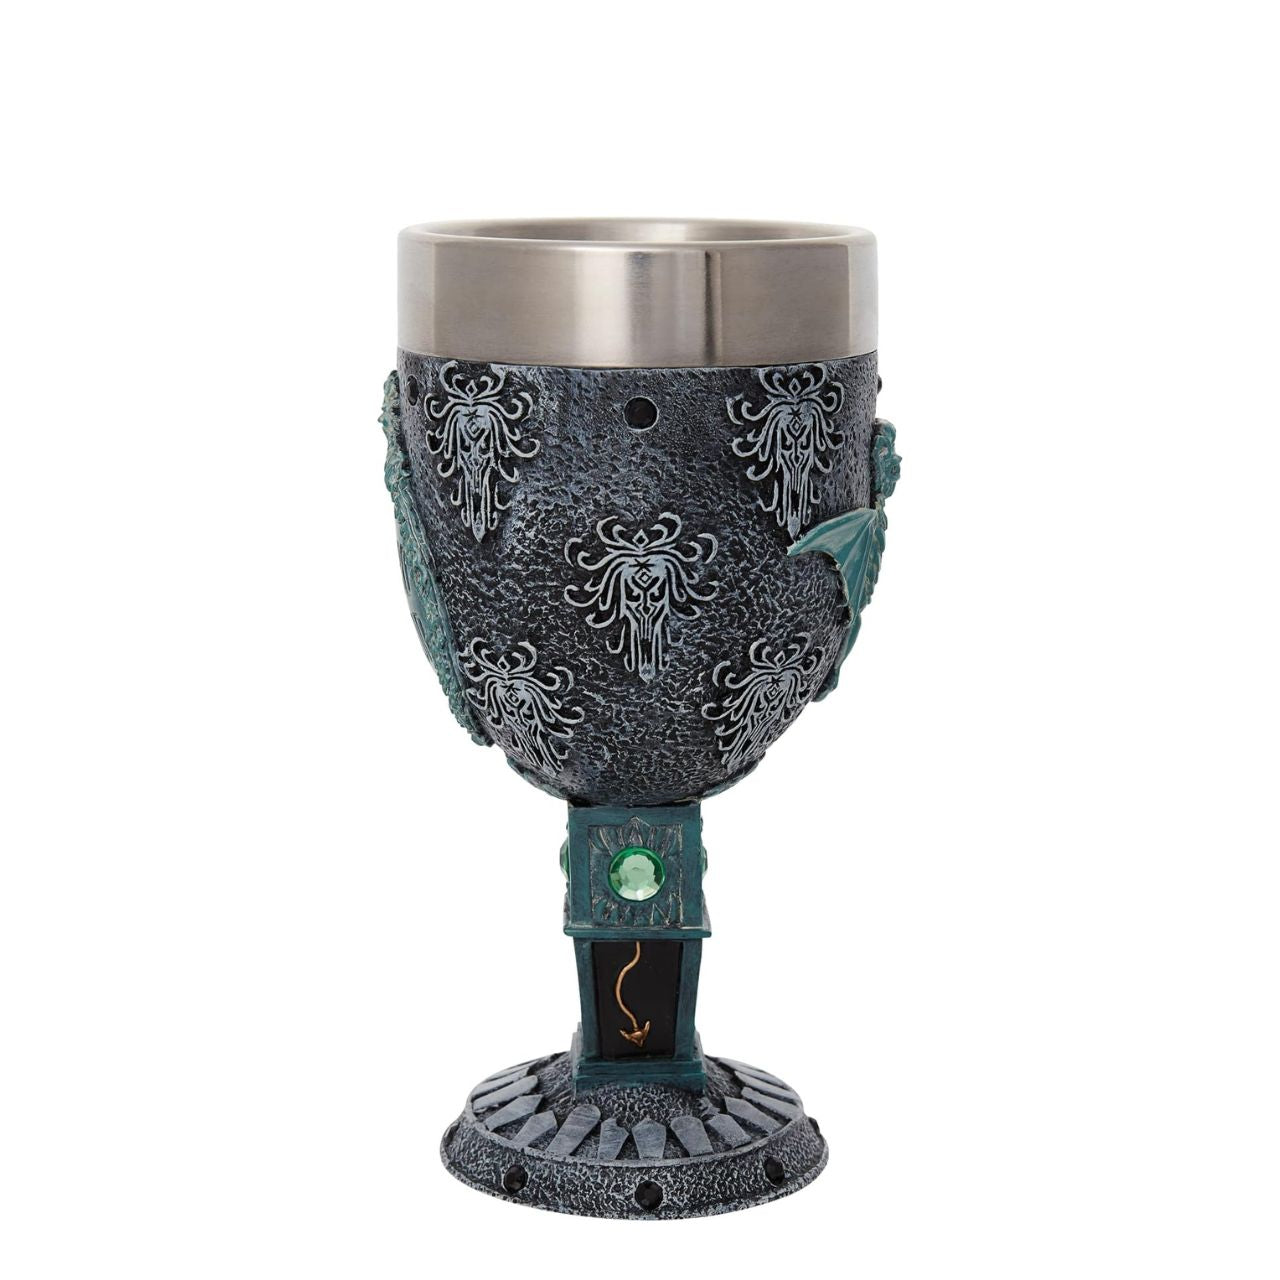 Haunted Mansion Decorative Goblet by Disney Showcase  The Haunted Mansion Goblet is adorned with black gems around the top and the base, creating a beautifully spooky statement piece. It features a clock design on the stem, a bat on the body of the piece and gravestones wrapped around the base, all inspired by the iconic Haunted Mansion ride